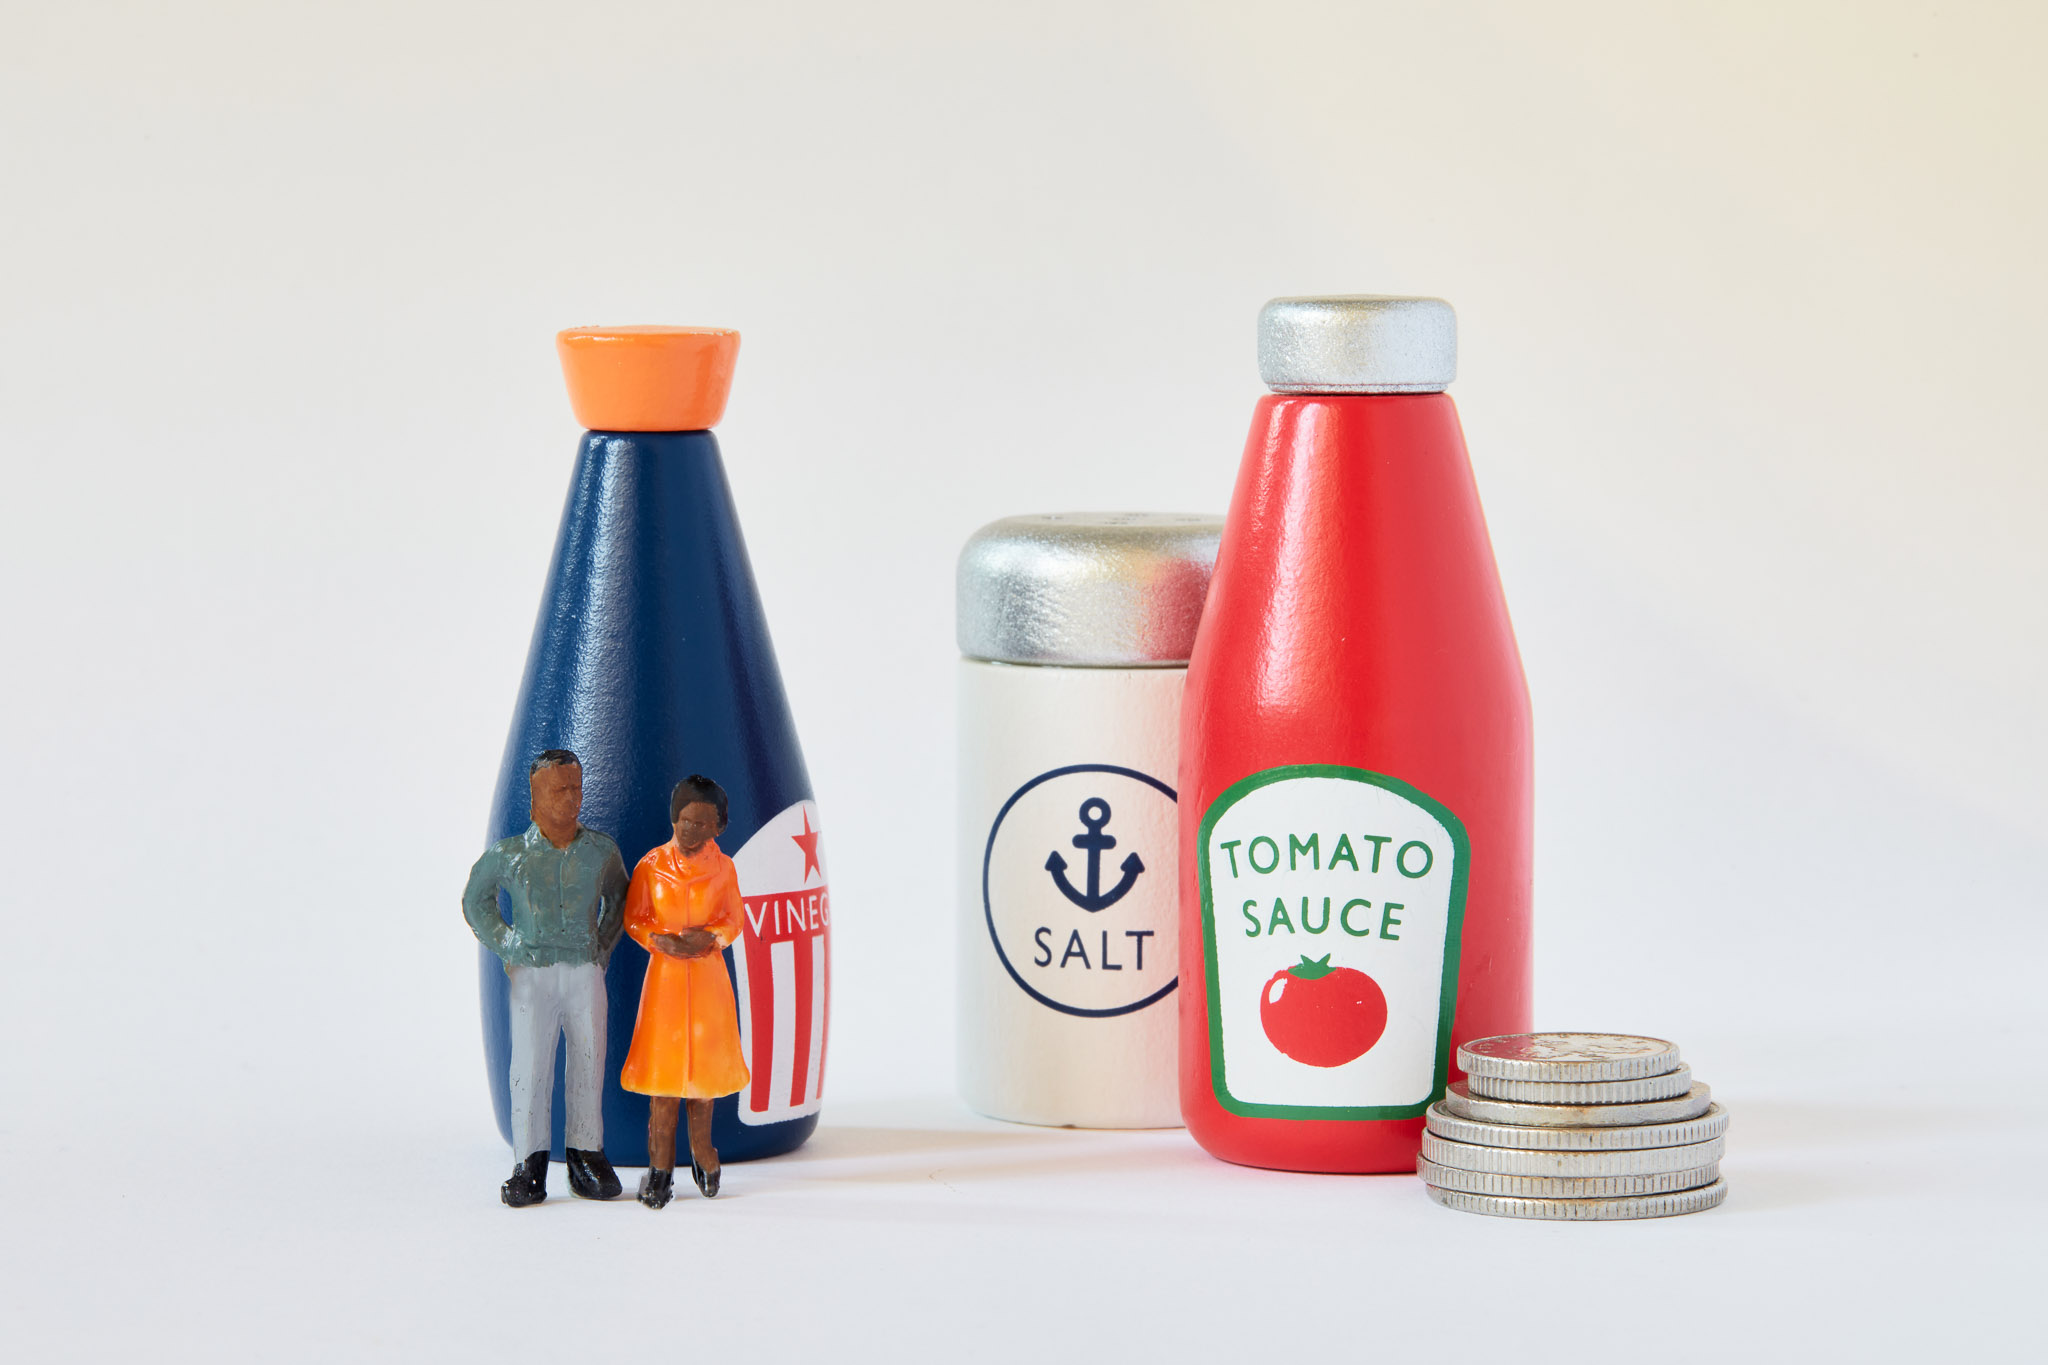 Small figurines standing in front of condiments and coins